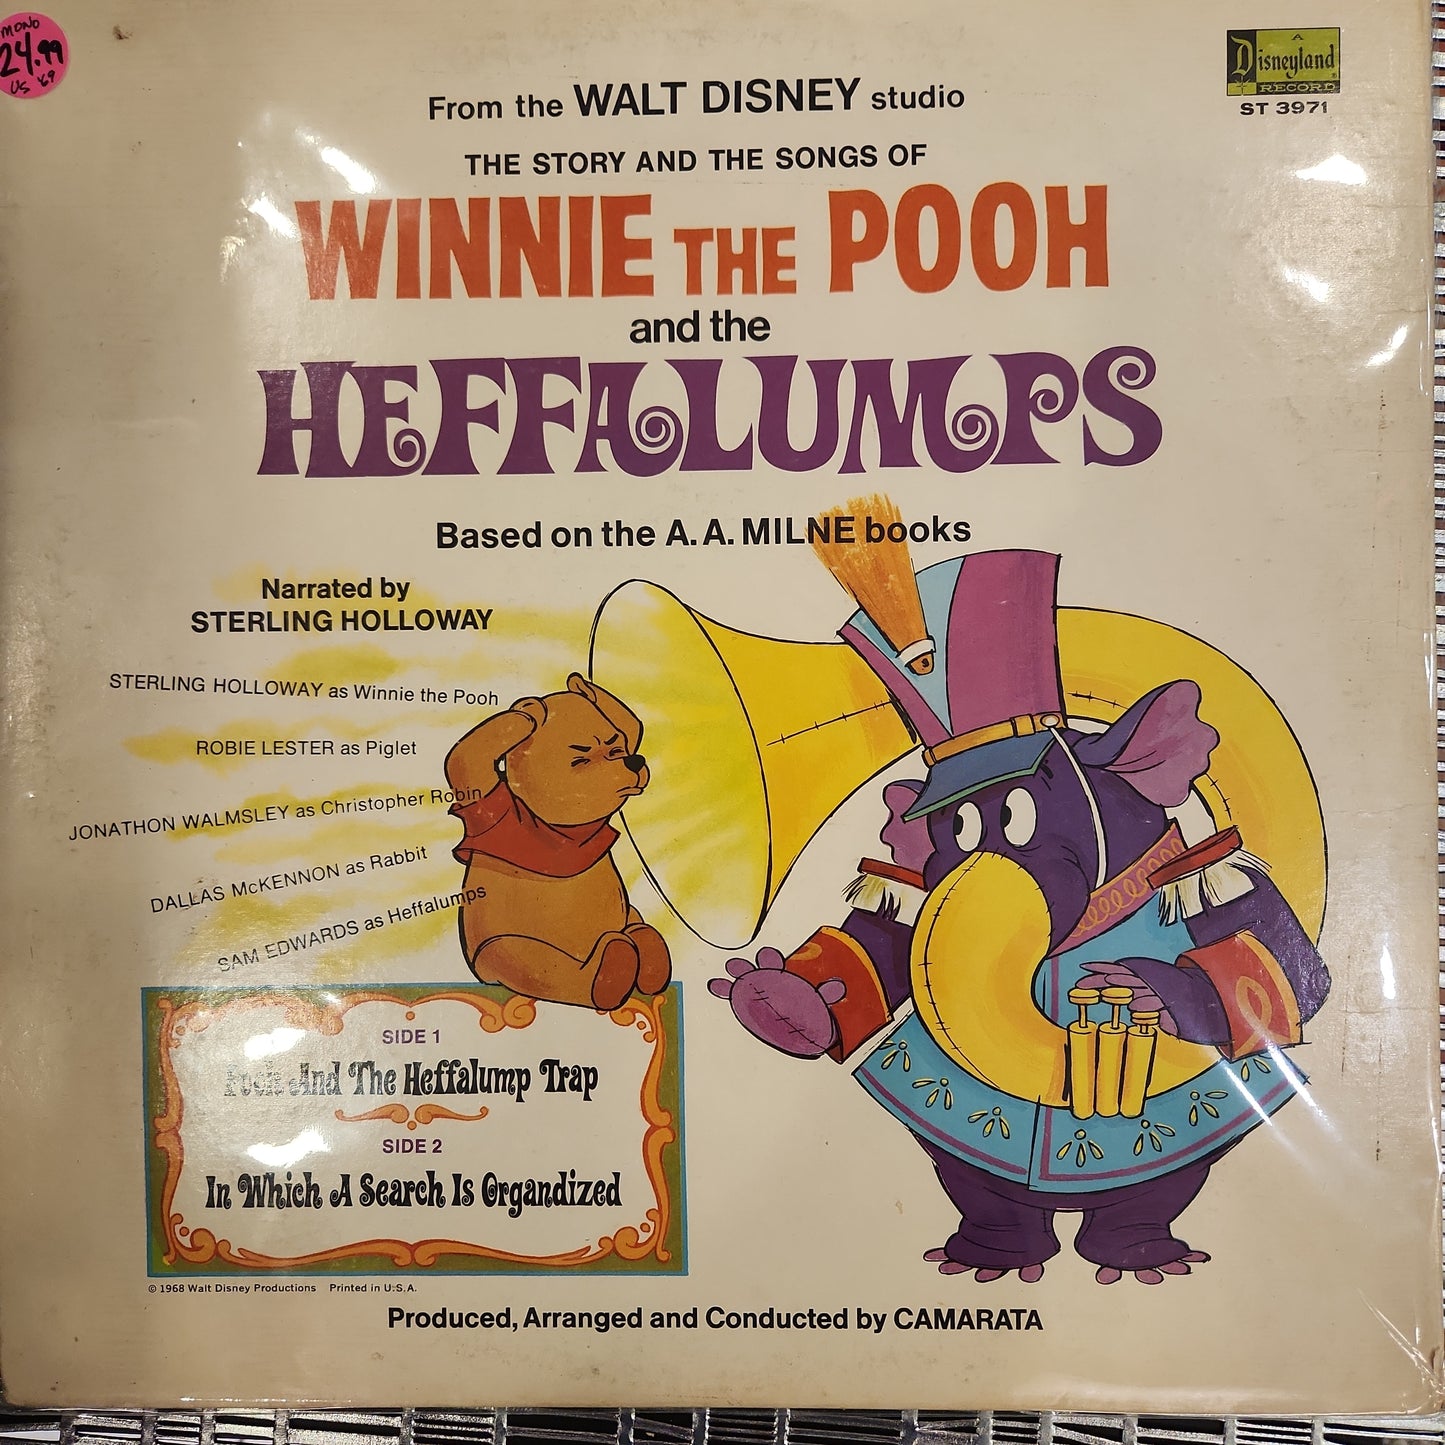 Winnie the Pooh and the Huffalumps Story and Songs